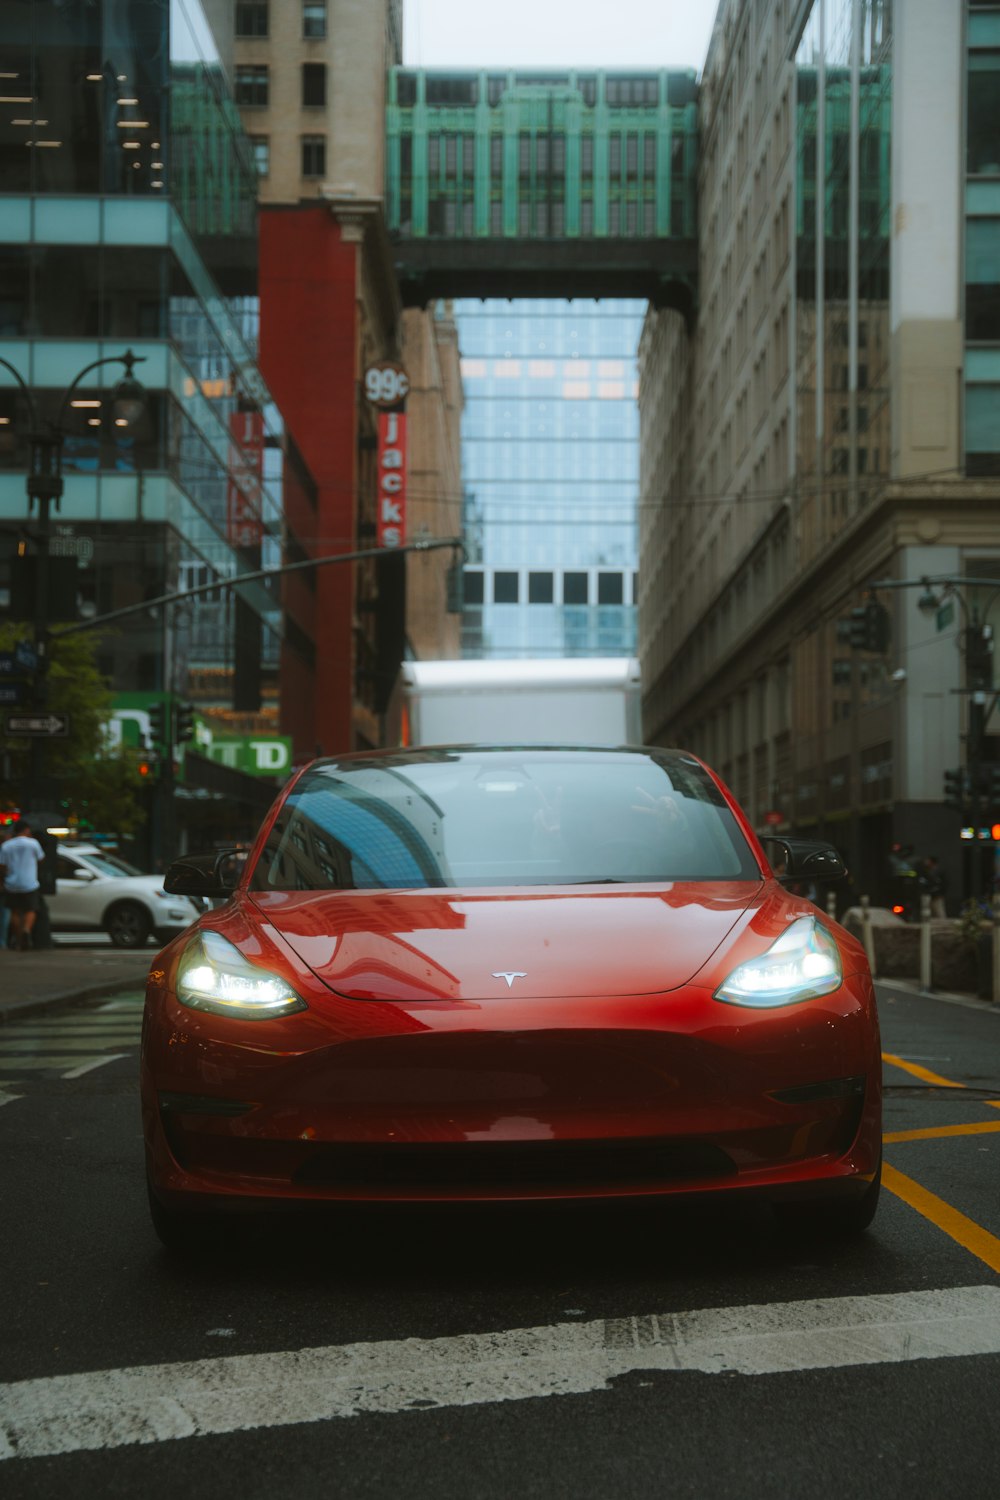 a red car driving down a street next to tall buildings